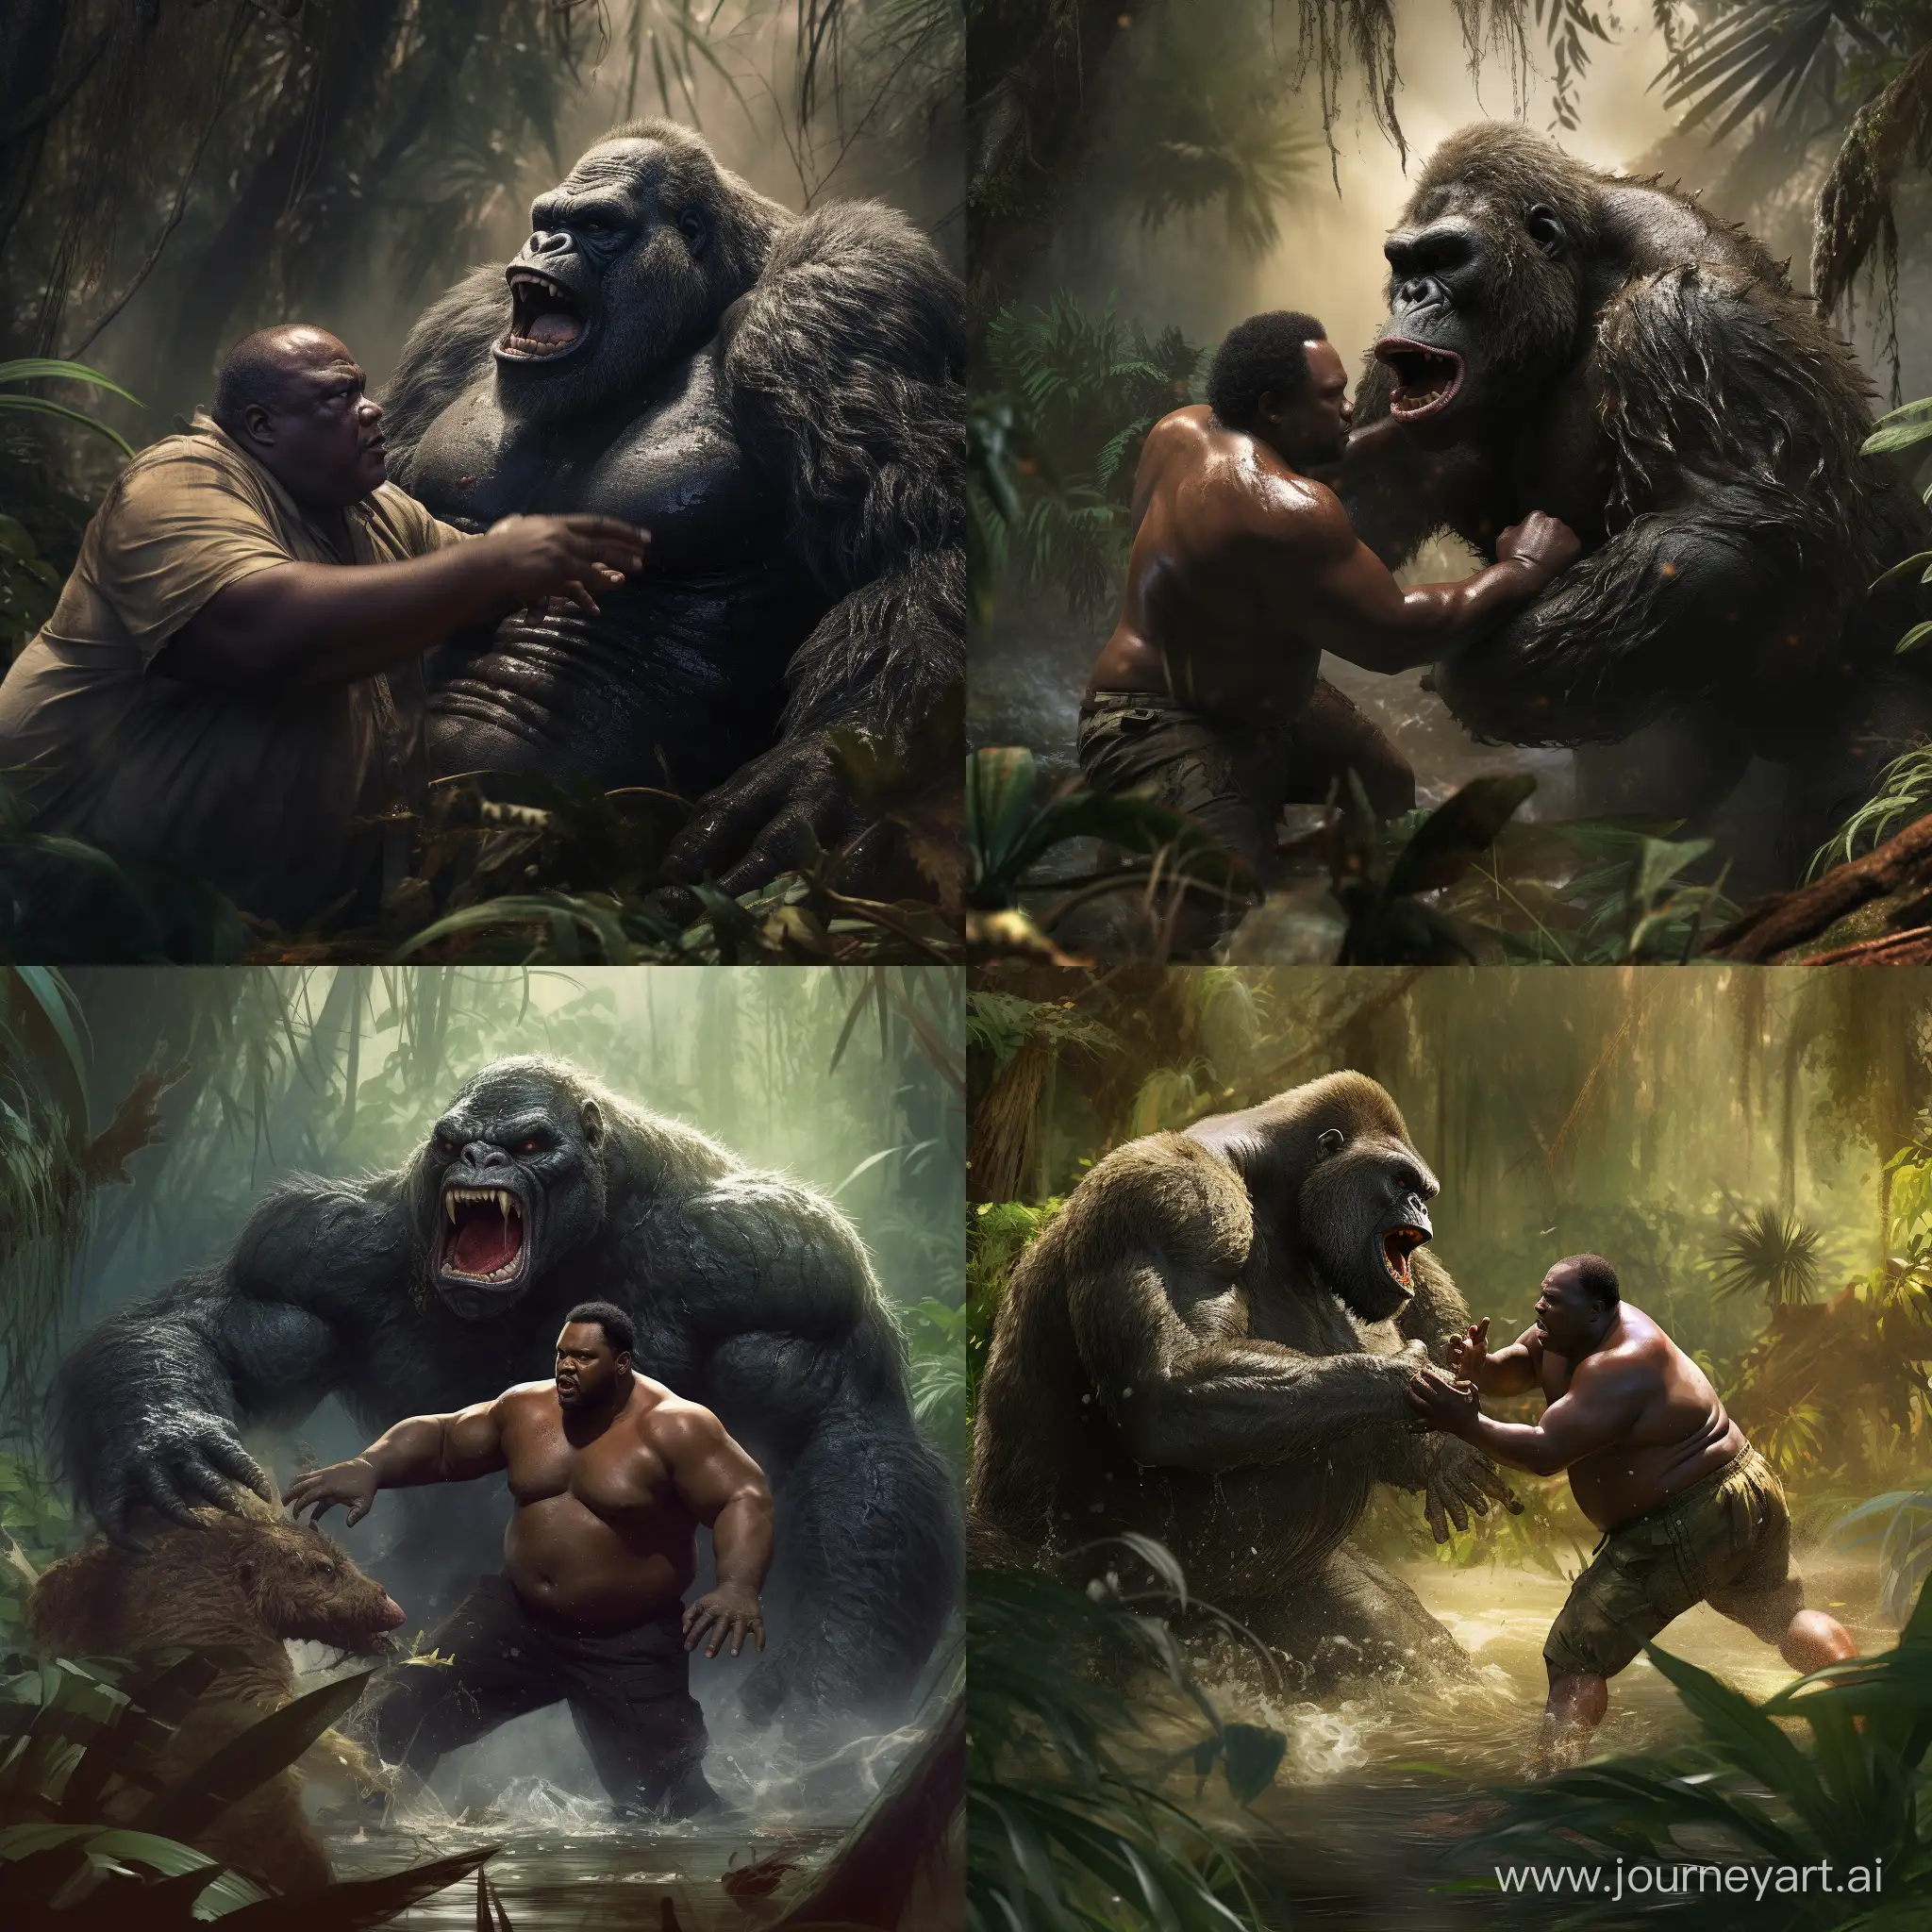 Intense-Battle-Sturdy-African-American-Man-Confronts-Gorilla-in-a-Swamp